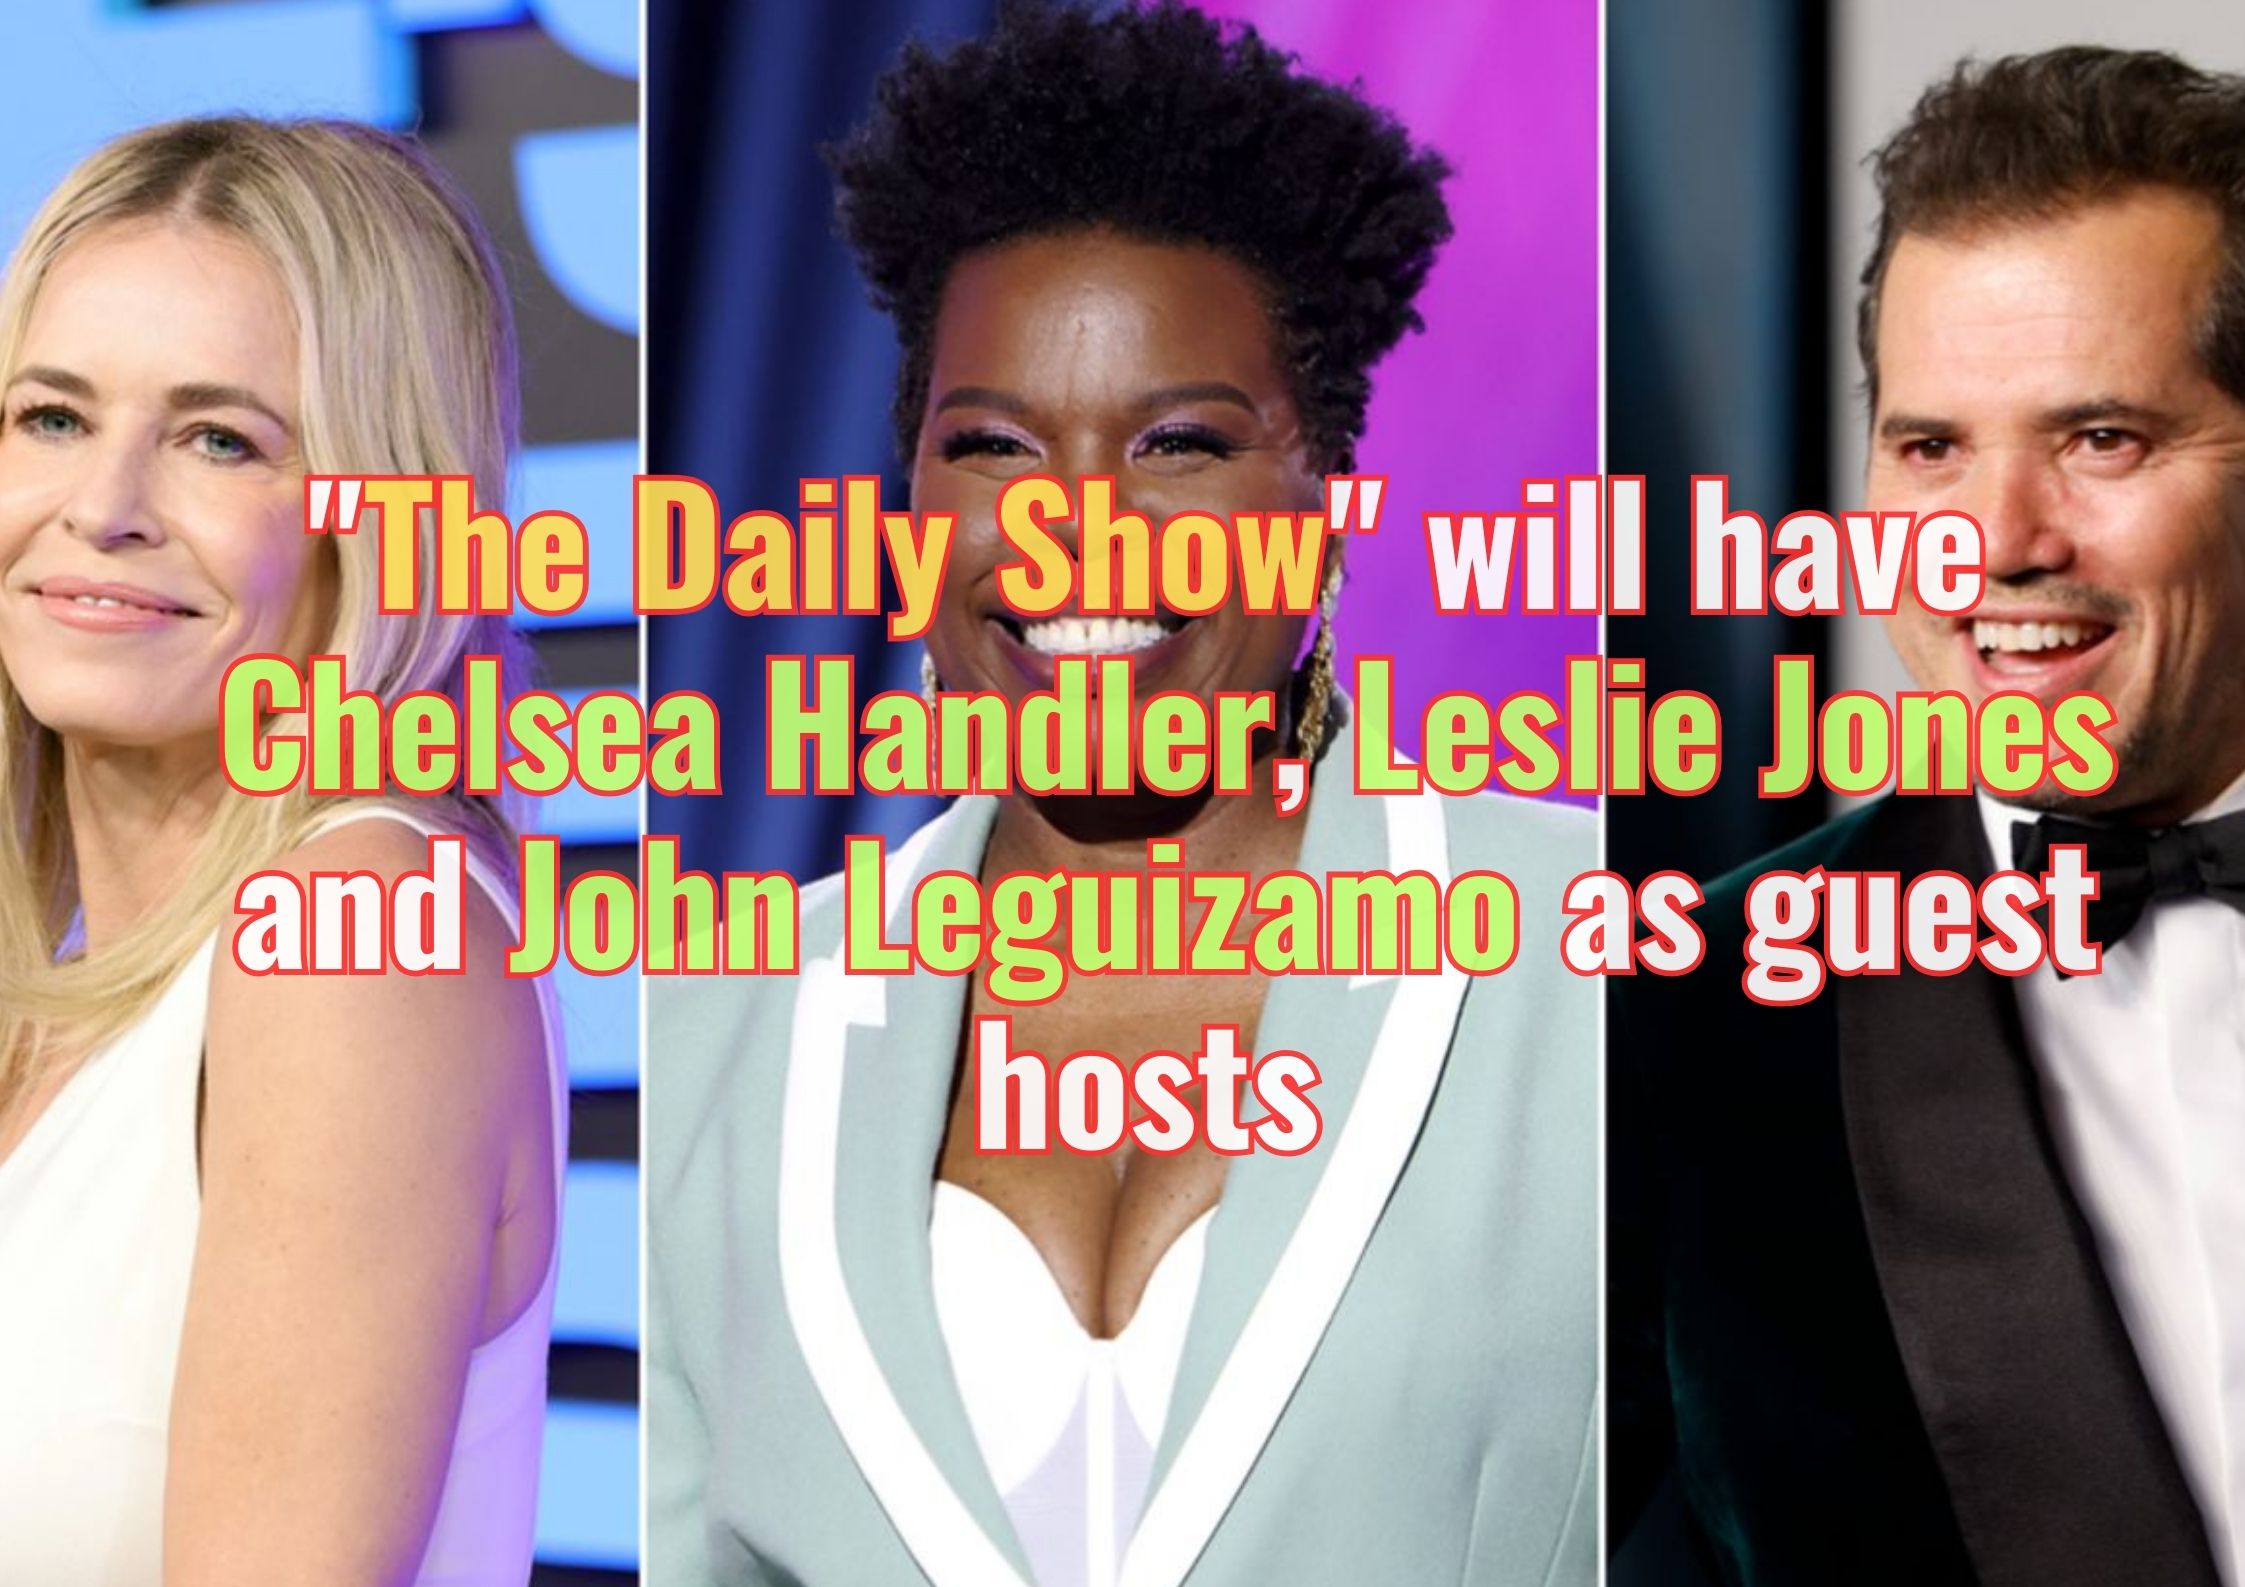 "The Daily Show" will have Chelsea Handler, Leslie Jones and John Leguizamo as guest hosts